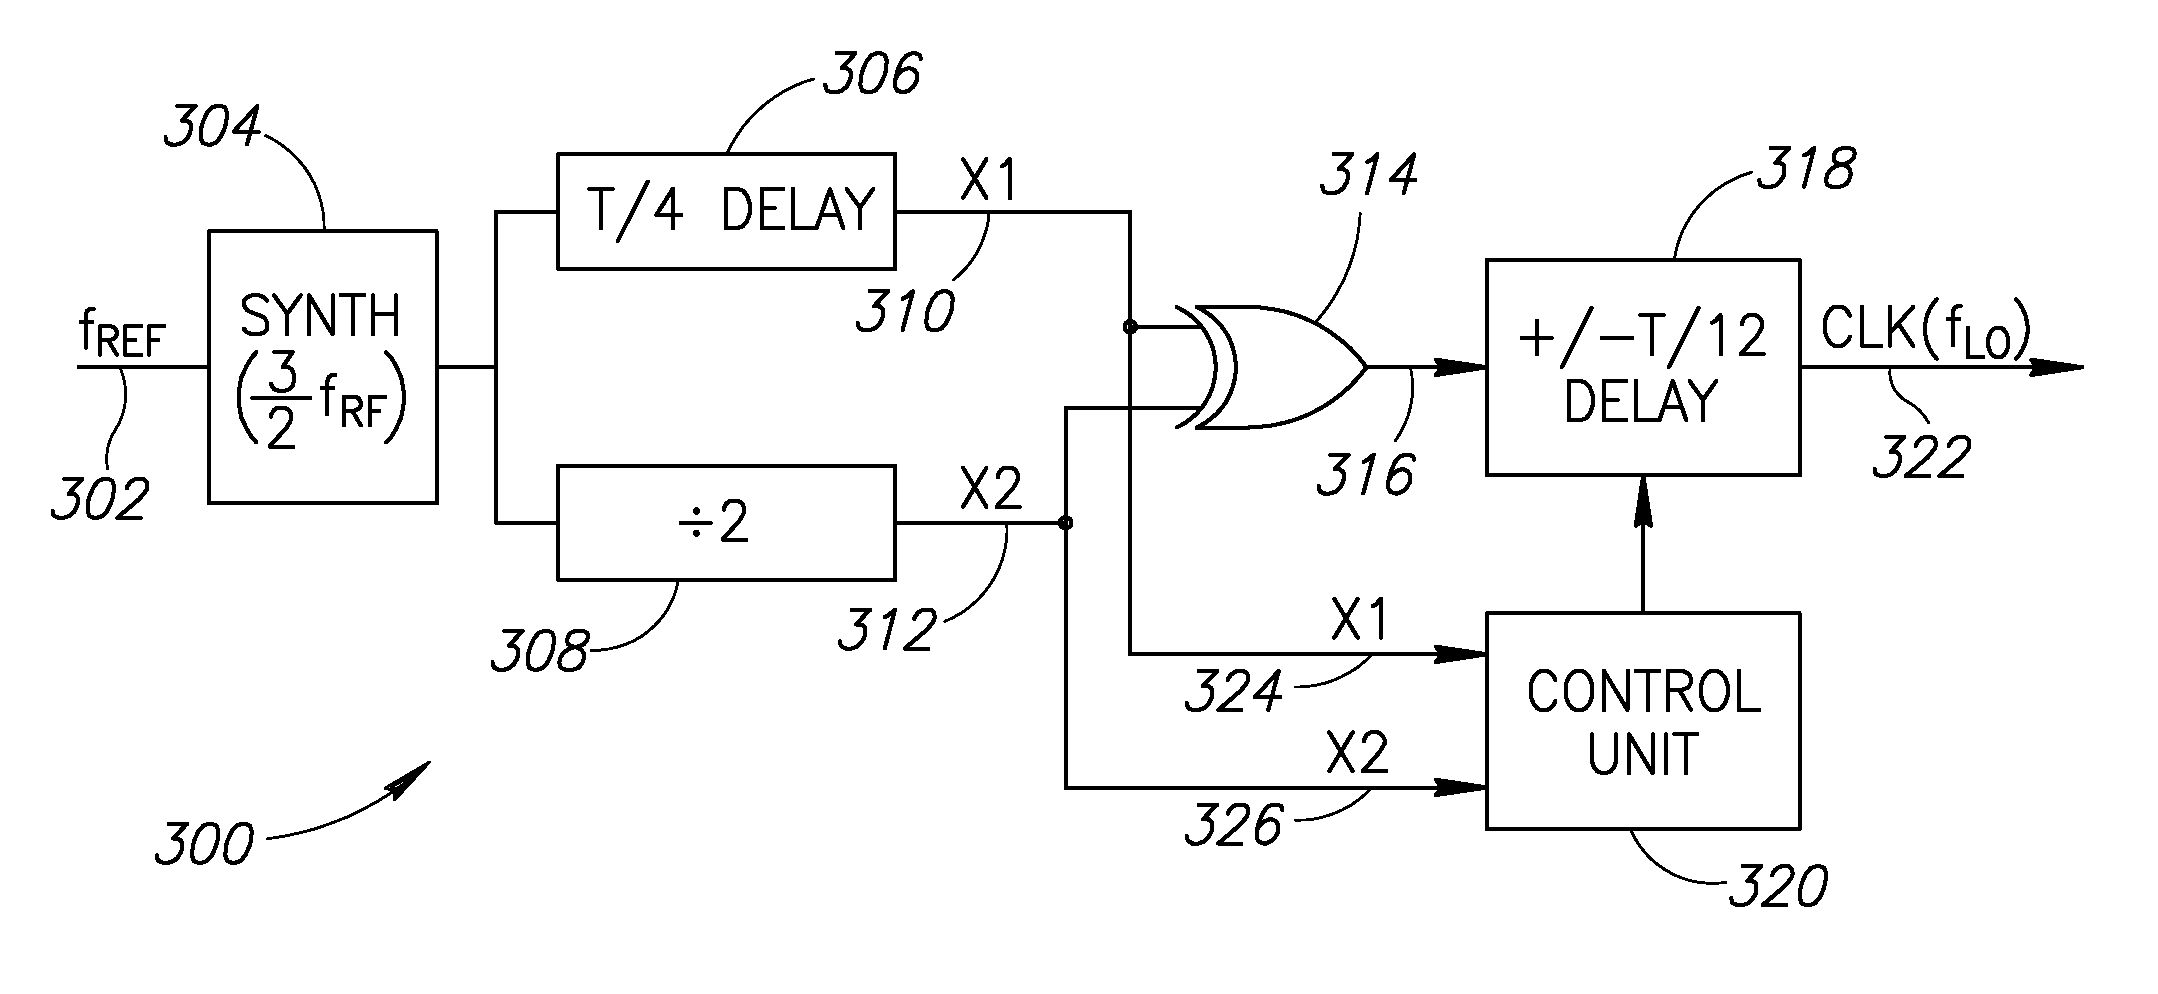 Local oscillator with non-harmonic ratio between oscillator and RF frequencies using XOR operation with jitter estimation and correction